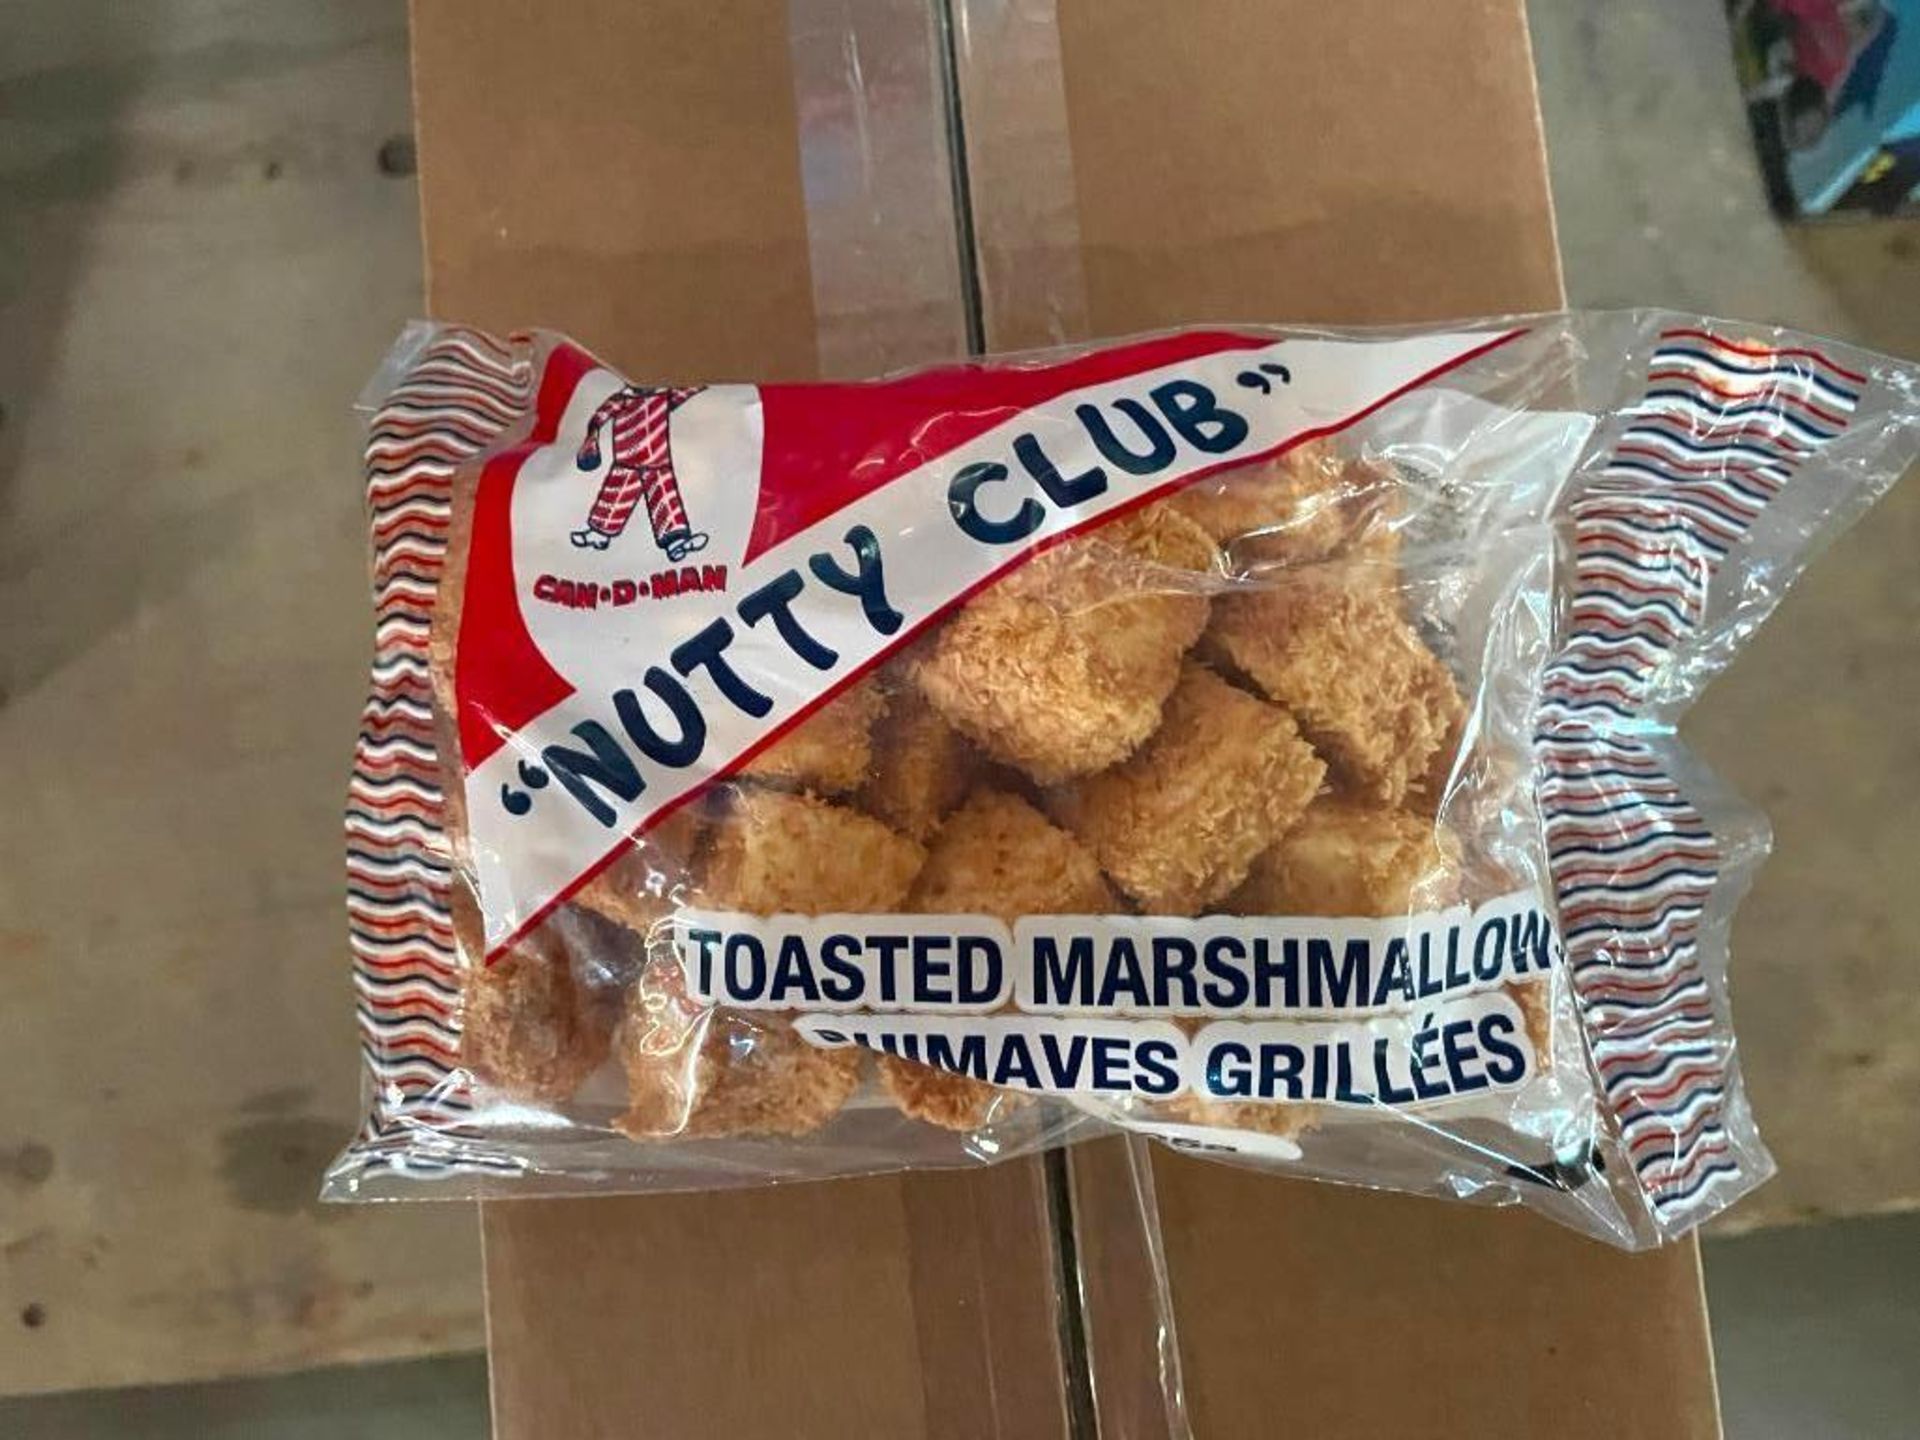 (3) BOXES OF NUTTY CLUB TOASTED MARSHMALLOWS, 12/255G BAGS PER BOX - Image 2 of 2